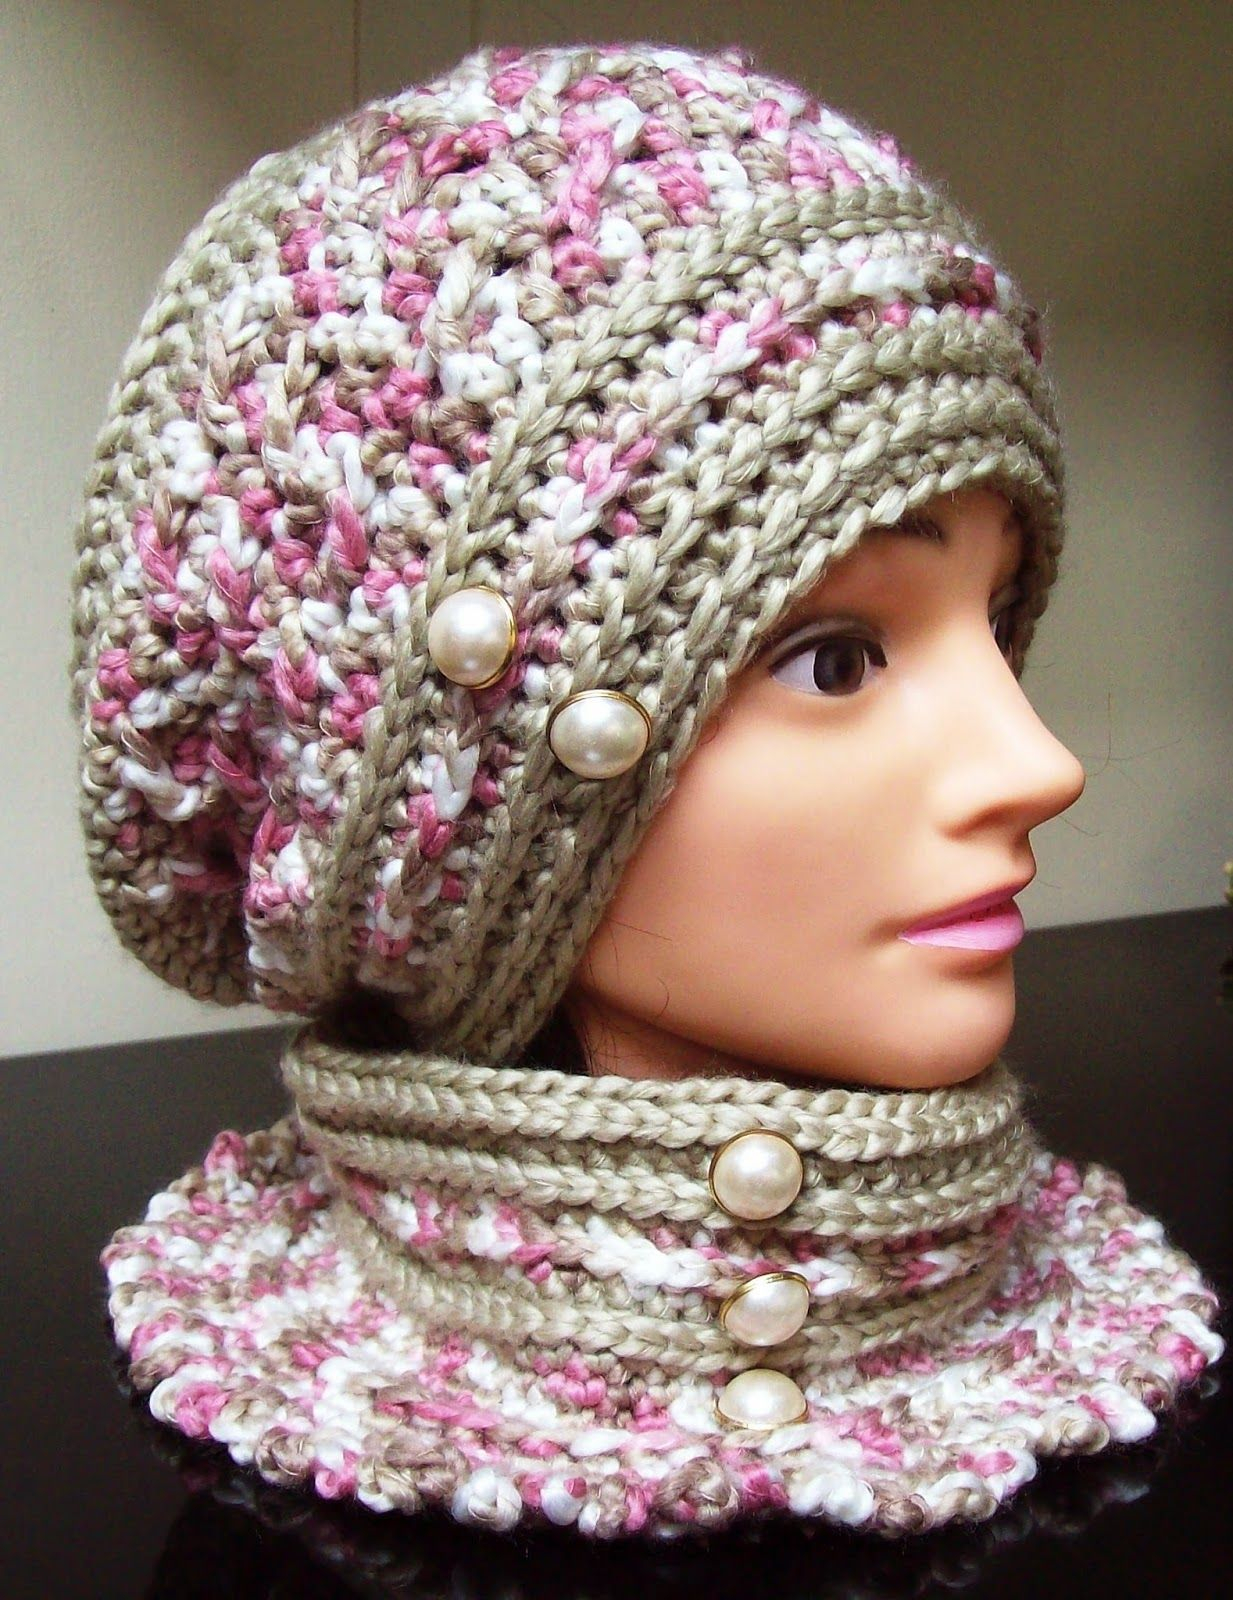 Free Crochet Hat Patterns For Adults Free Adult Hat Patterns Crochet Hats Pinterest Crochet Hats